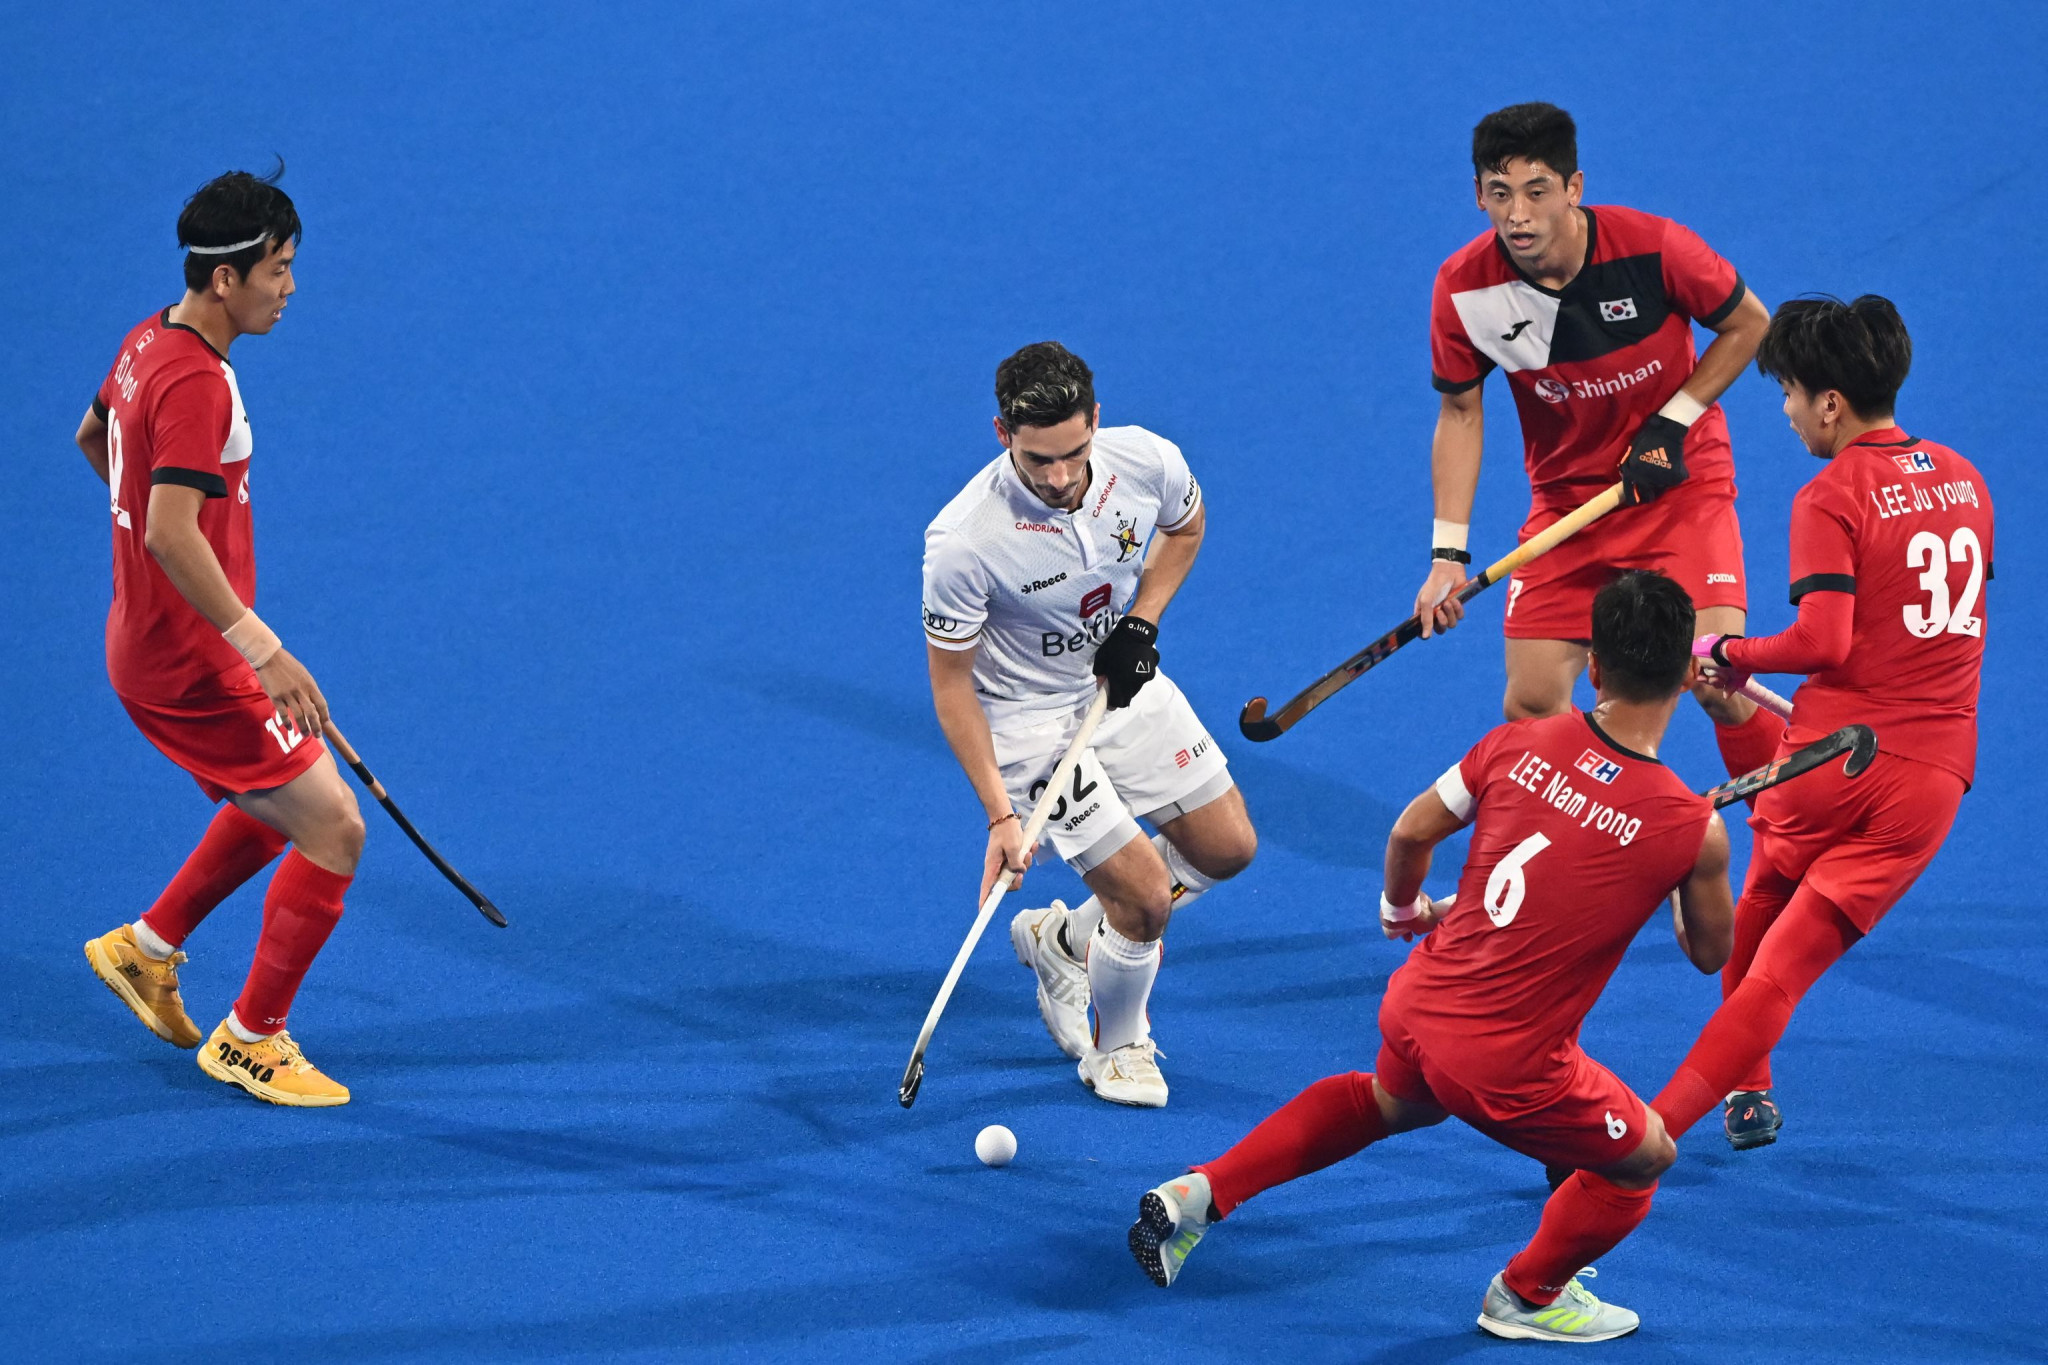 South Korea, playing in red, advanced to the quarter-finals of the Men's Hockey World Cup after beating Argentina on penalties ©Getty Images